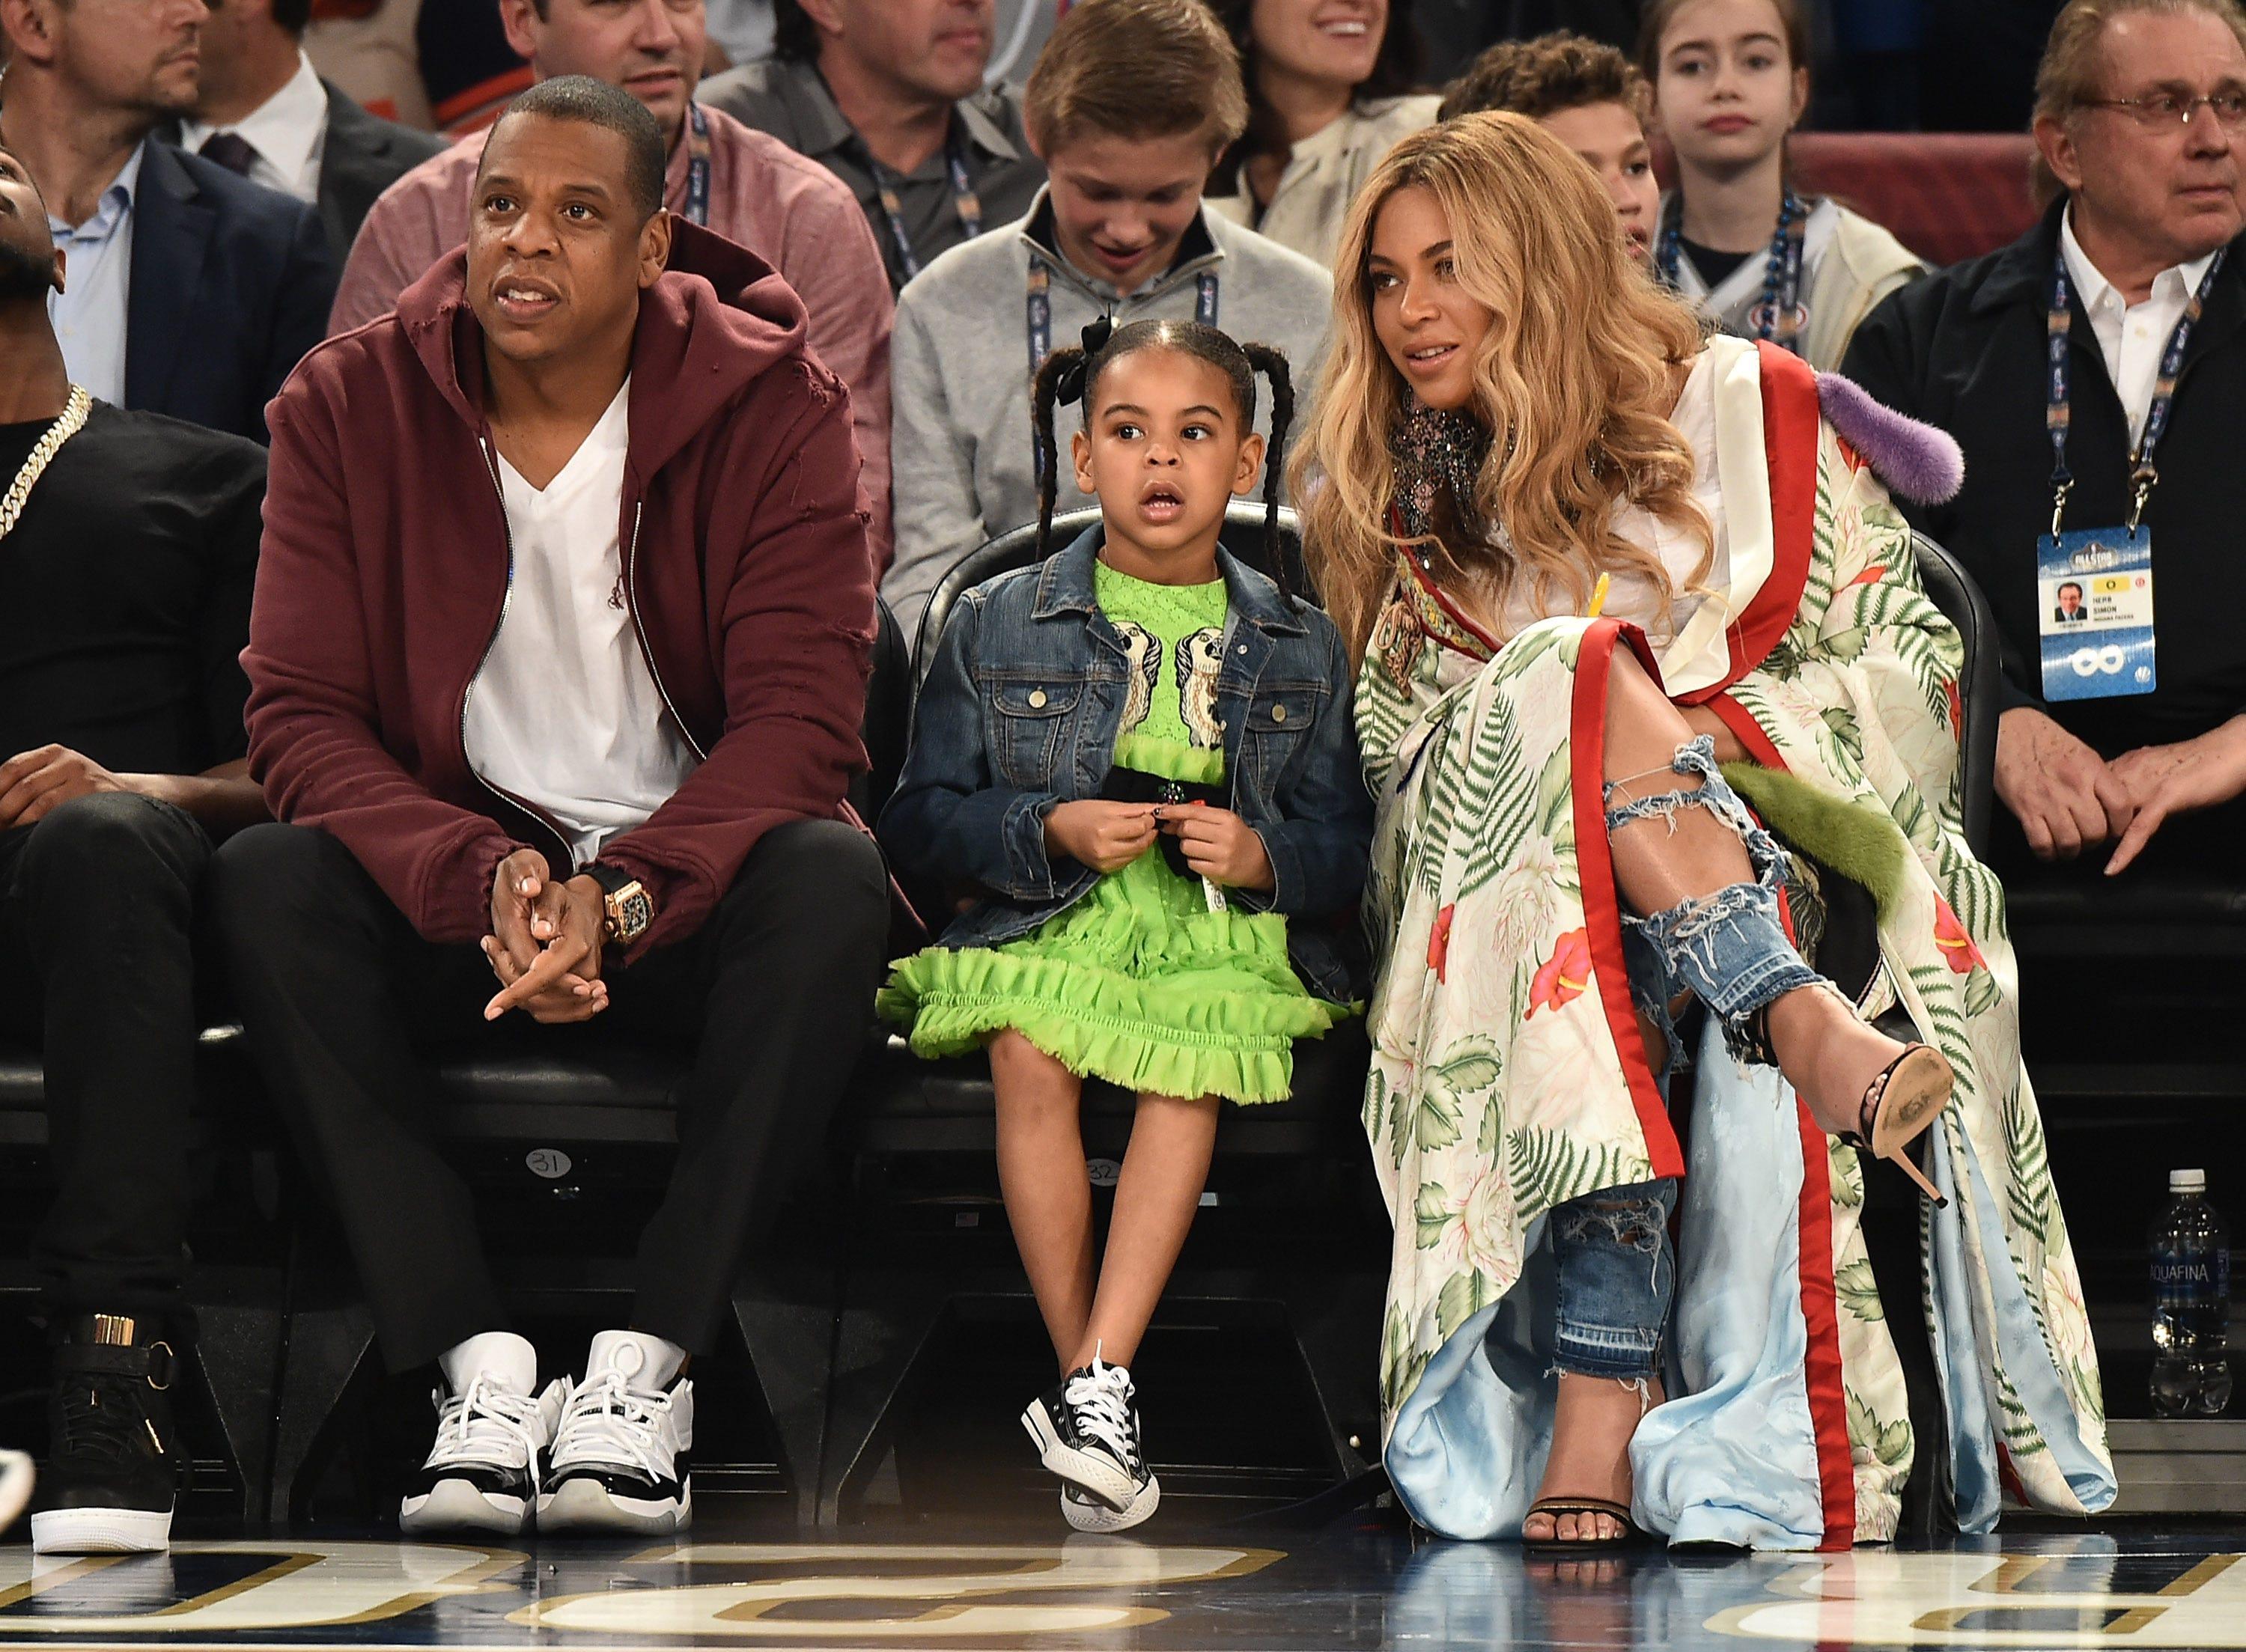 (L-R) Jay-Z, Blue Ivy Carter, and Beyoncé Knowles-Carter attend the 66th NBA All-Star Game at Smoothie King Center on Feb. 19, 2017, in New Orleans, Louisiana.